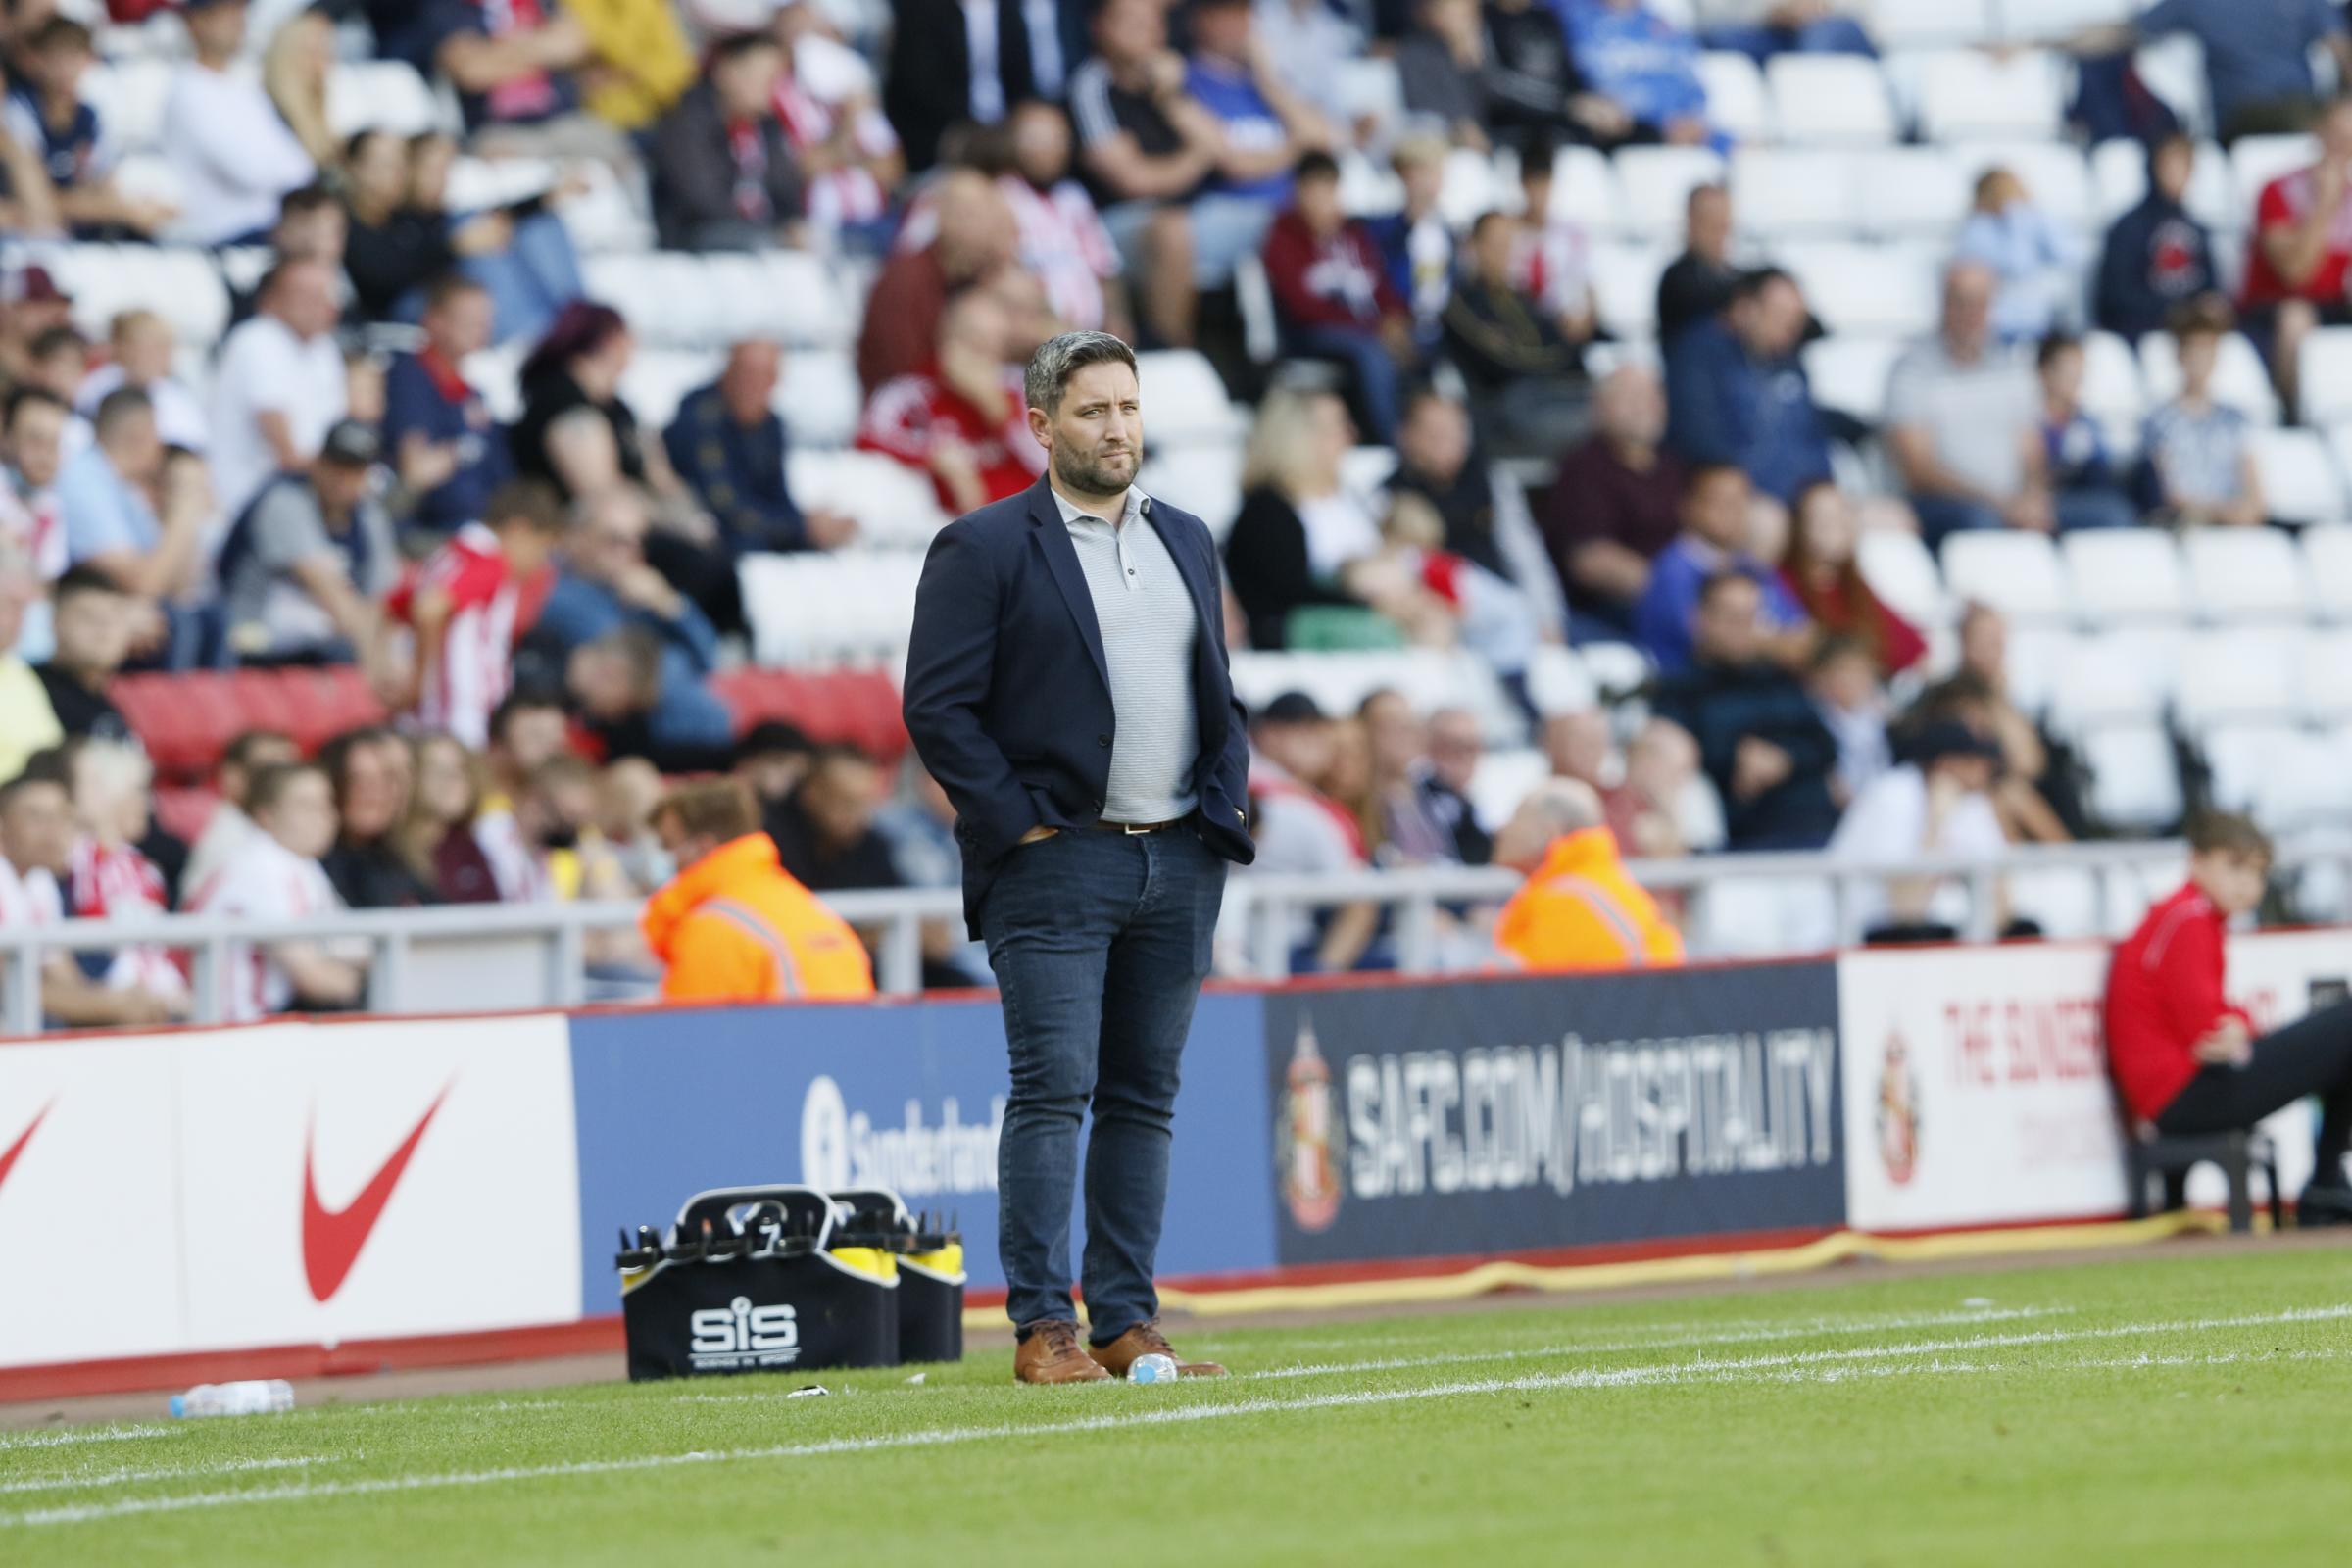 Lee Johnson says there is still room for improvement in his Sunderland team